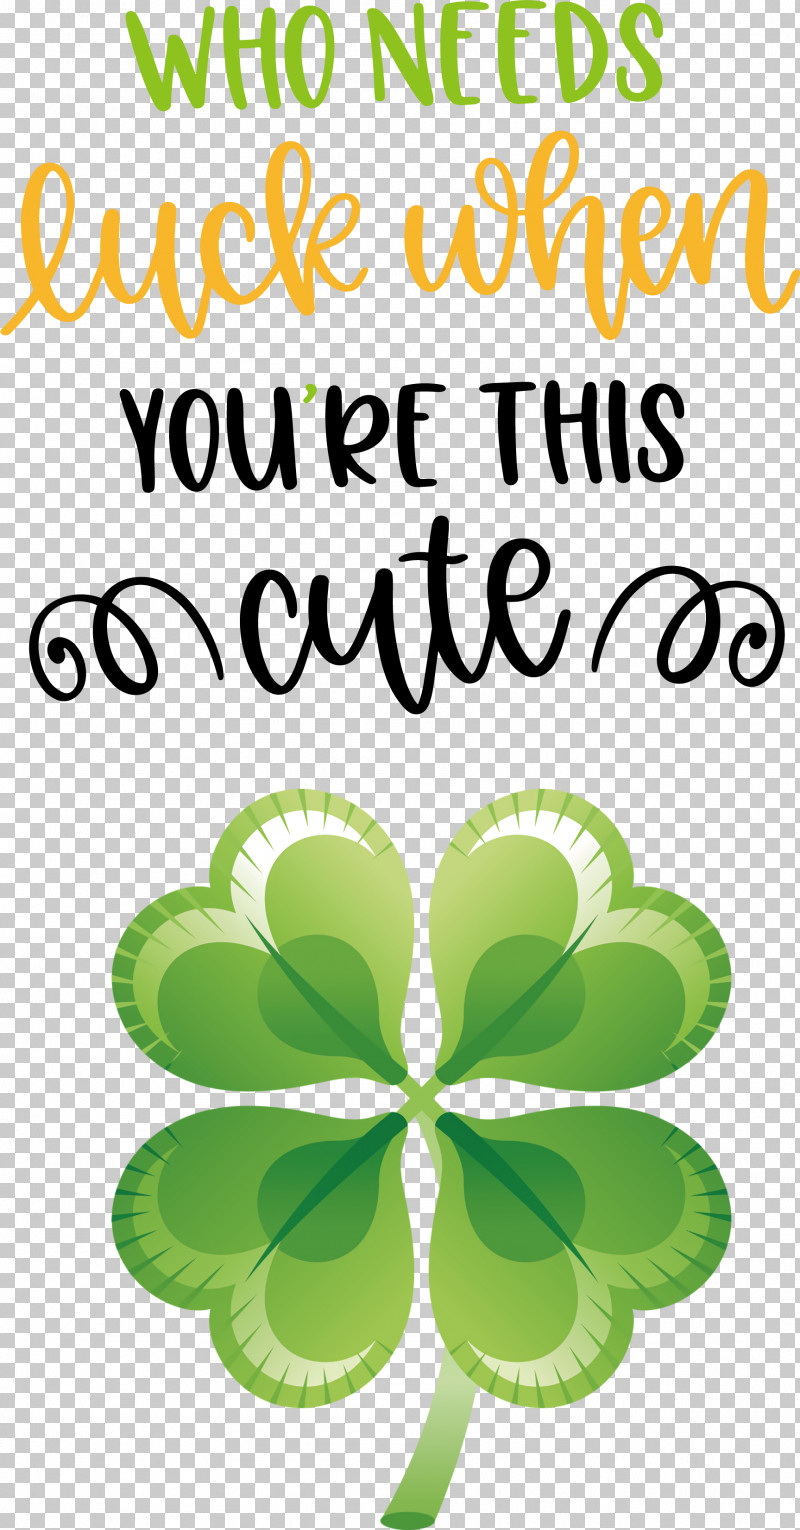 Luck St Patricks Day Saint Patrick PNG, Clipart, Fourleaf Clover, Irish People, Luck, Patricks Day, Saint Patrick Free PNG Download